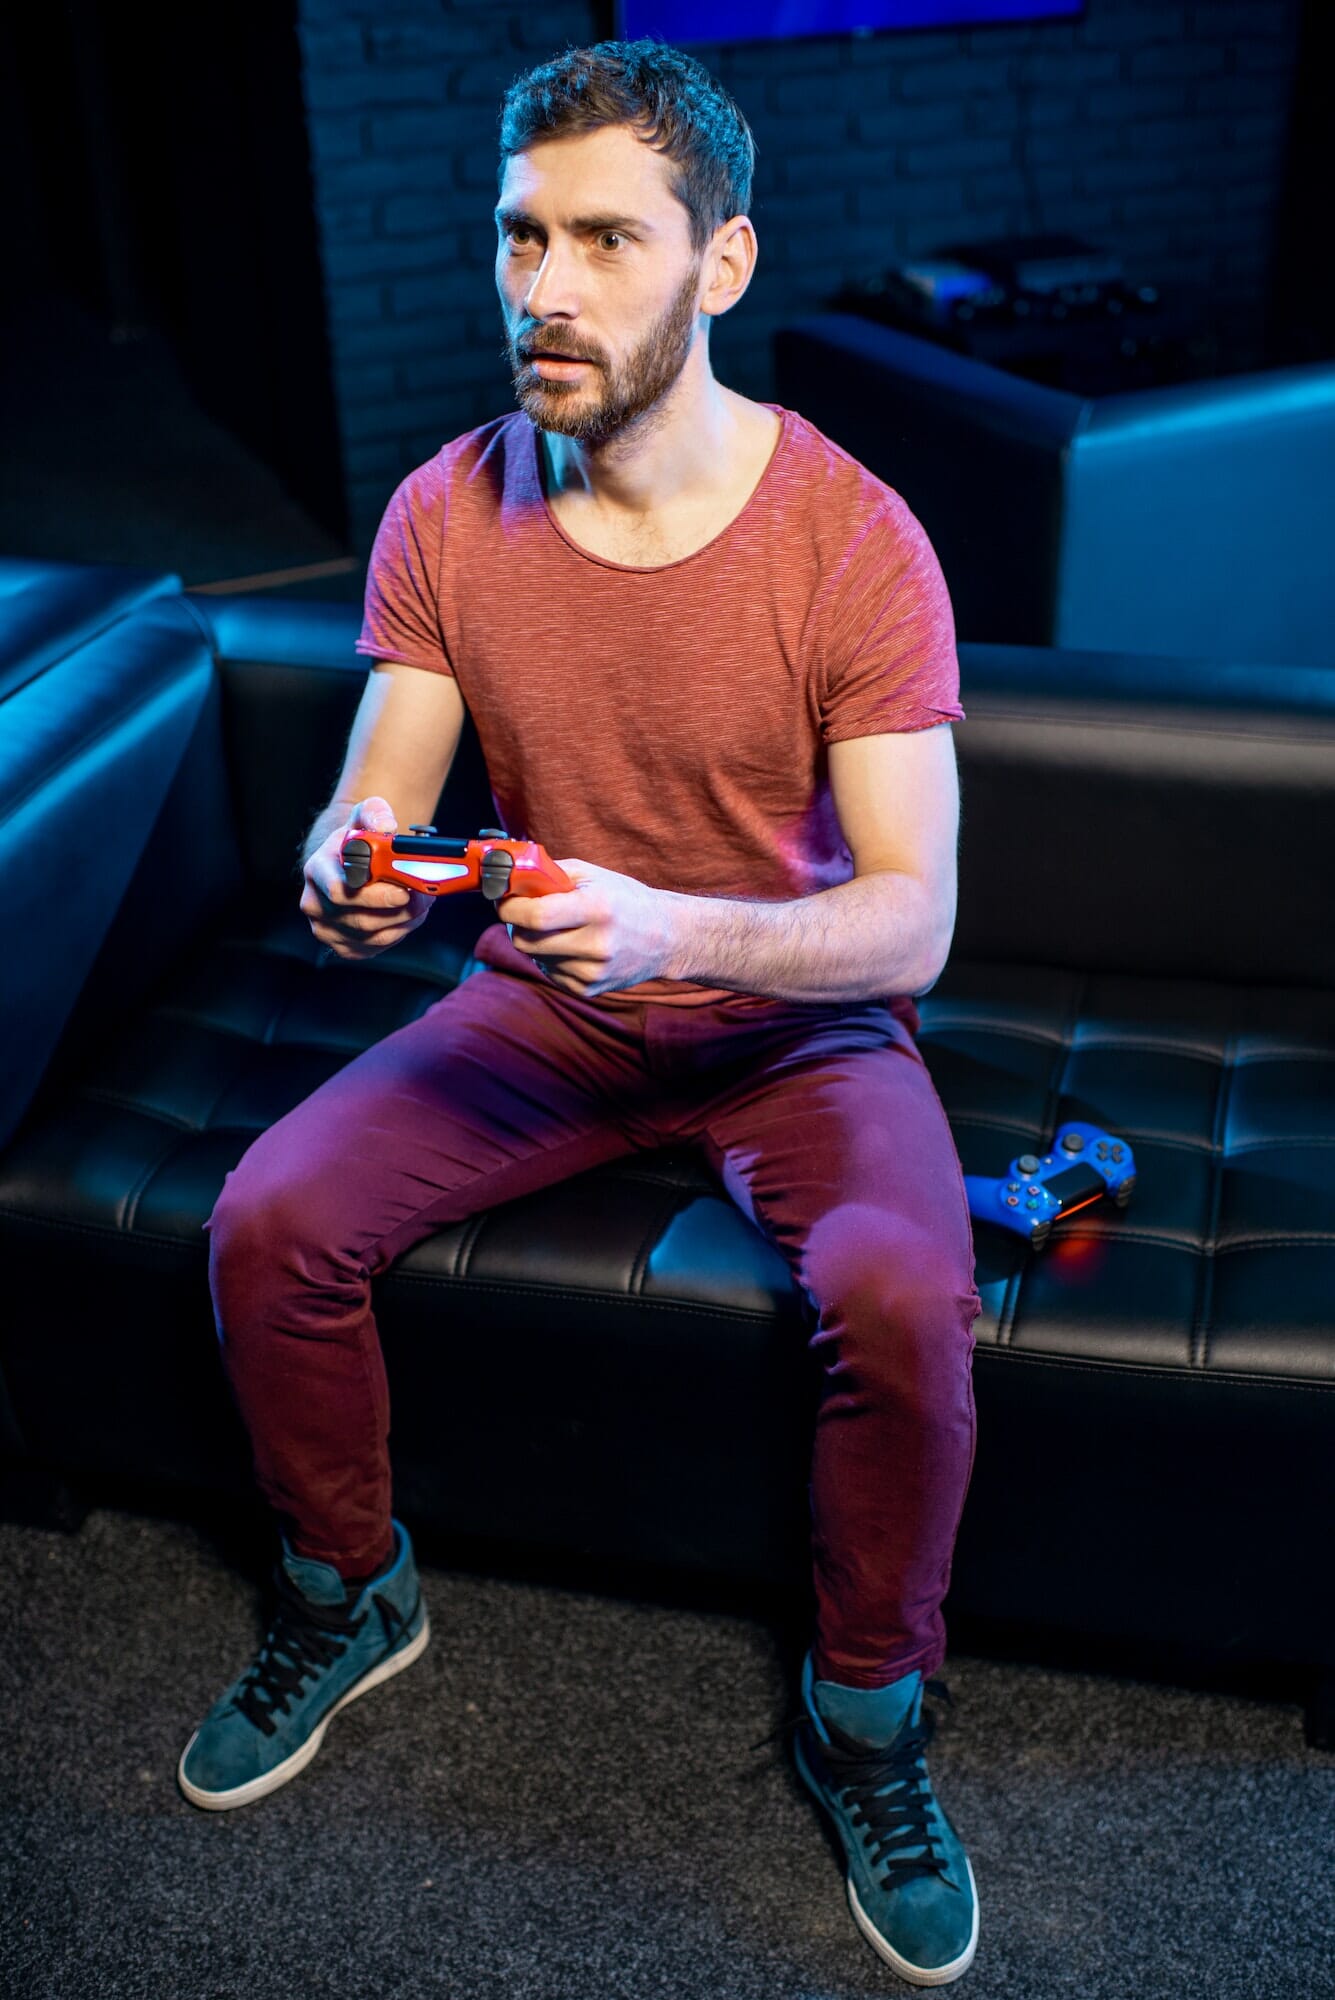 Man playing video games with gaming console in the club, Life Simulation Games Development Agency